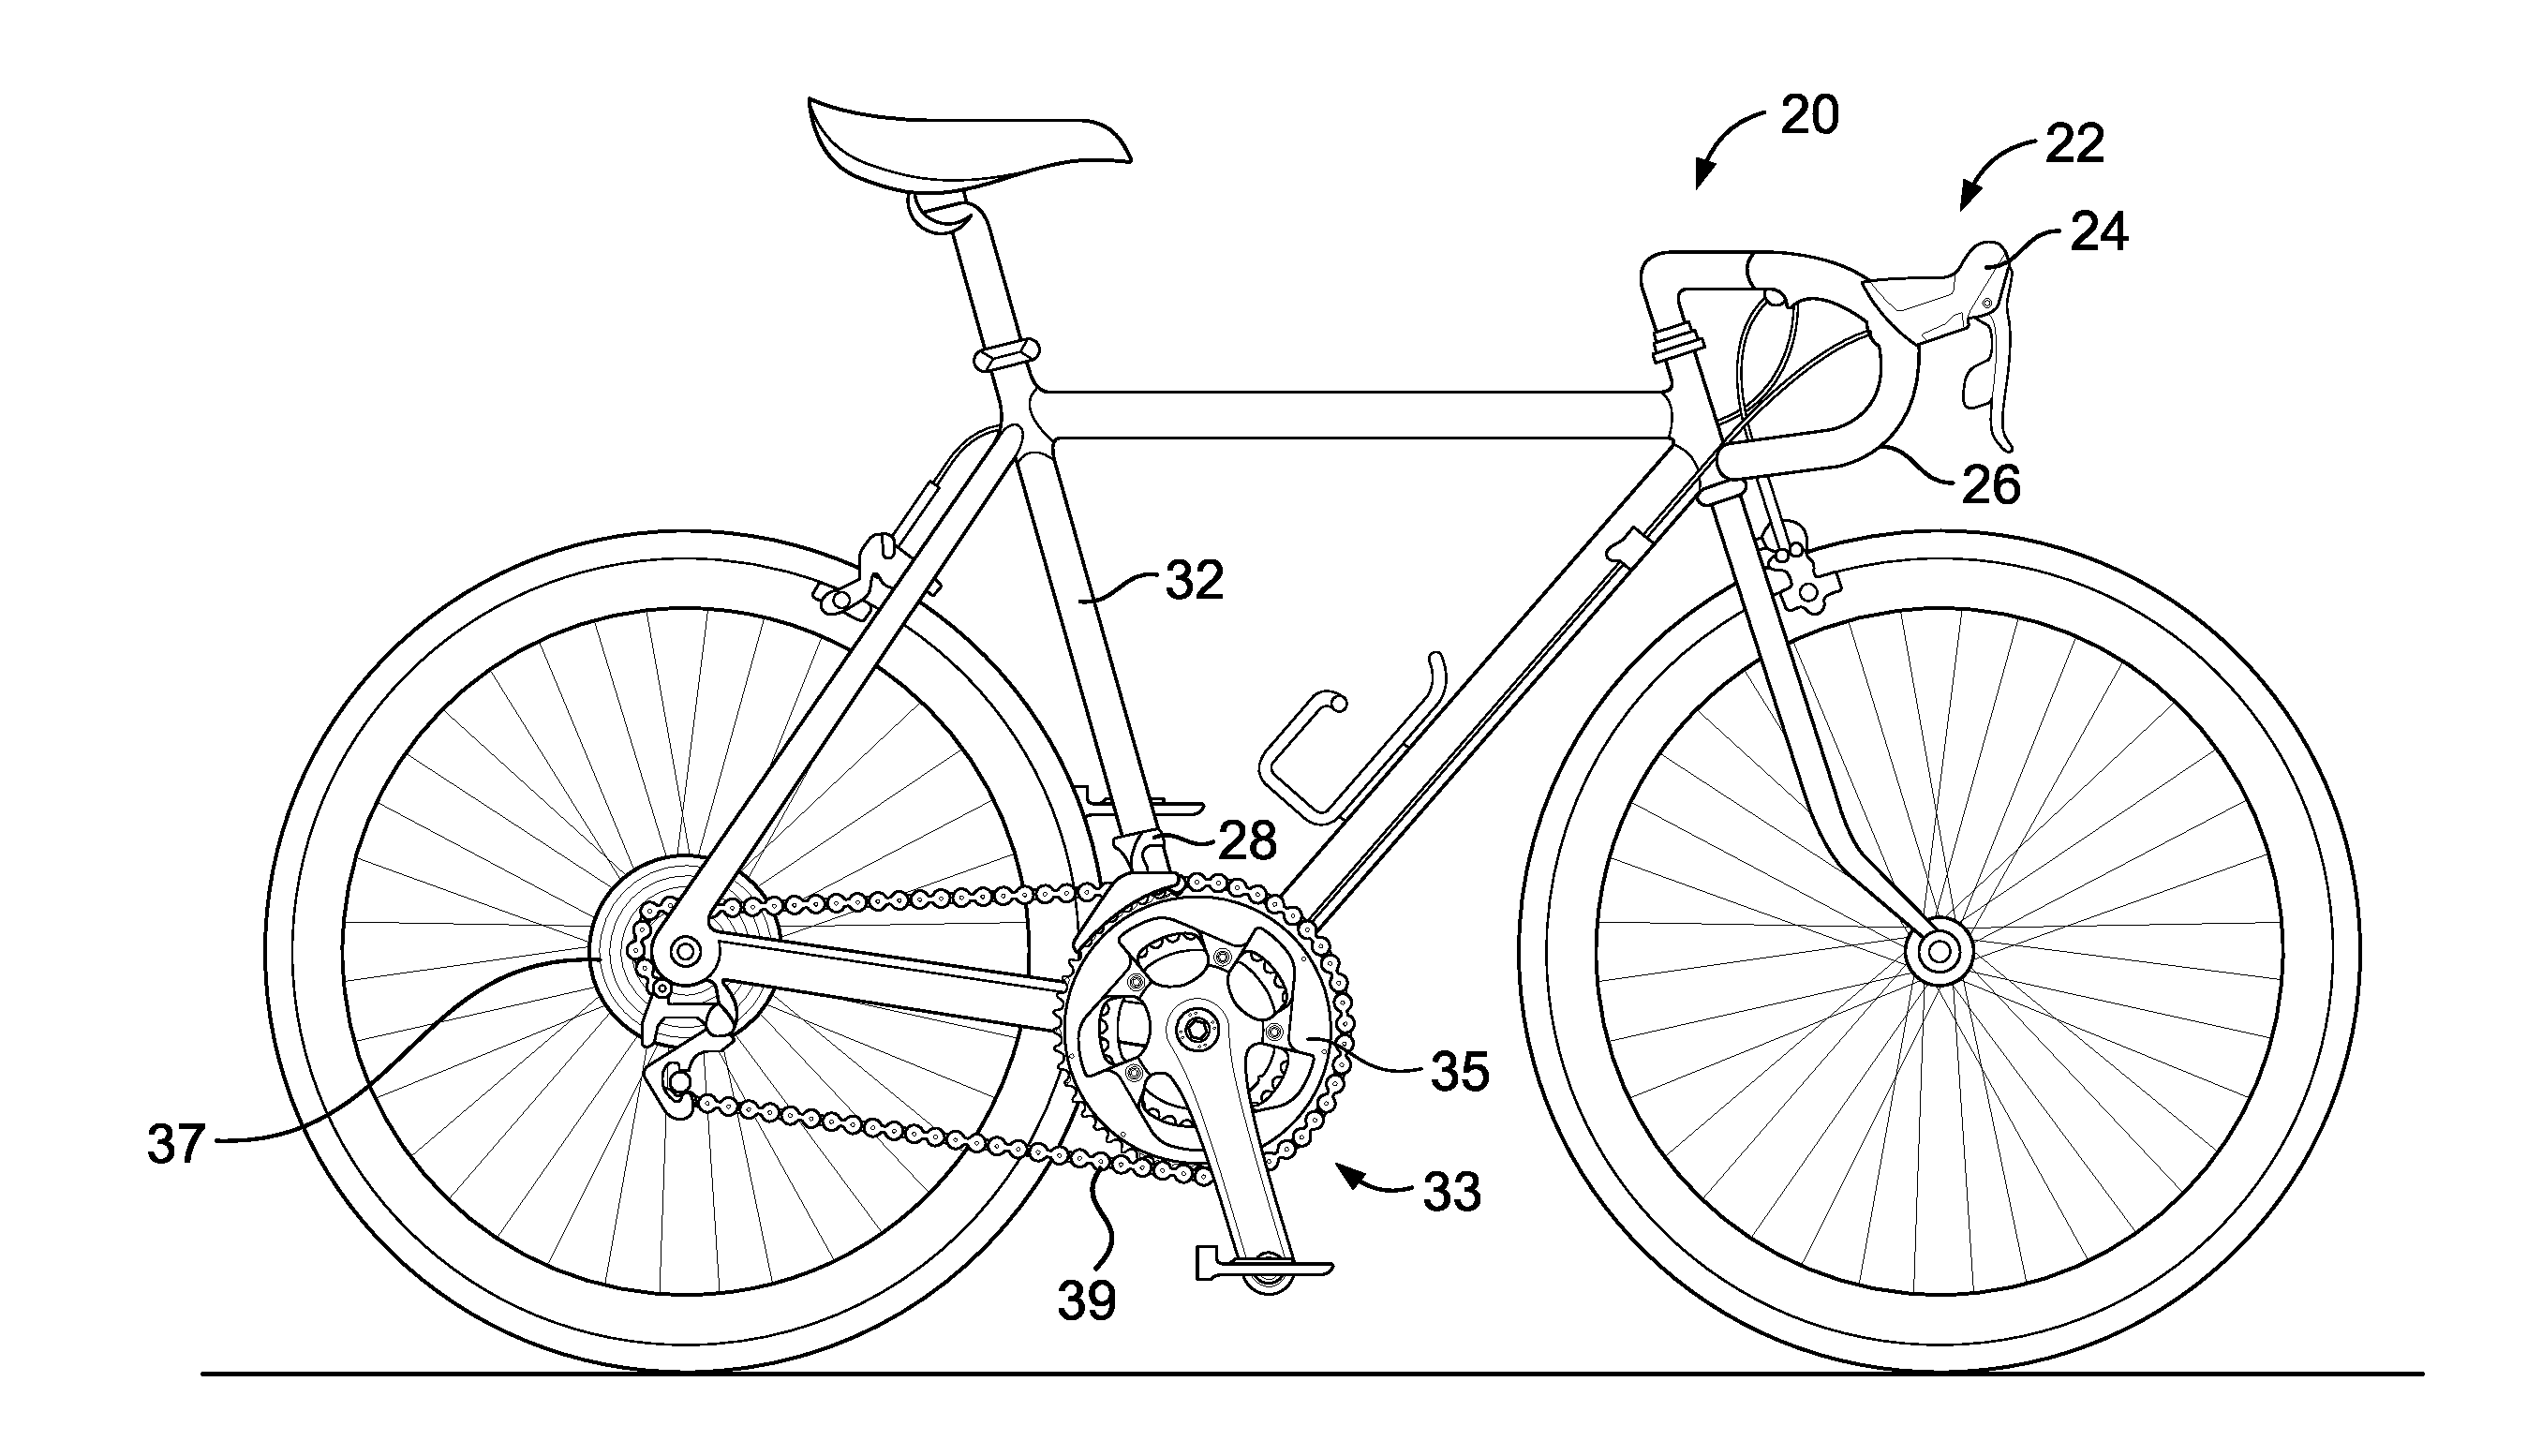 Electronic shifting systems and methods